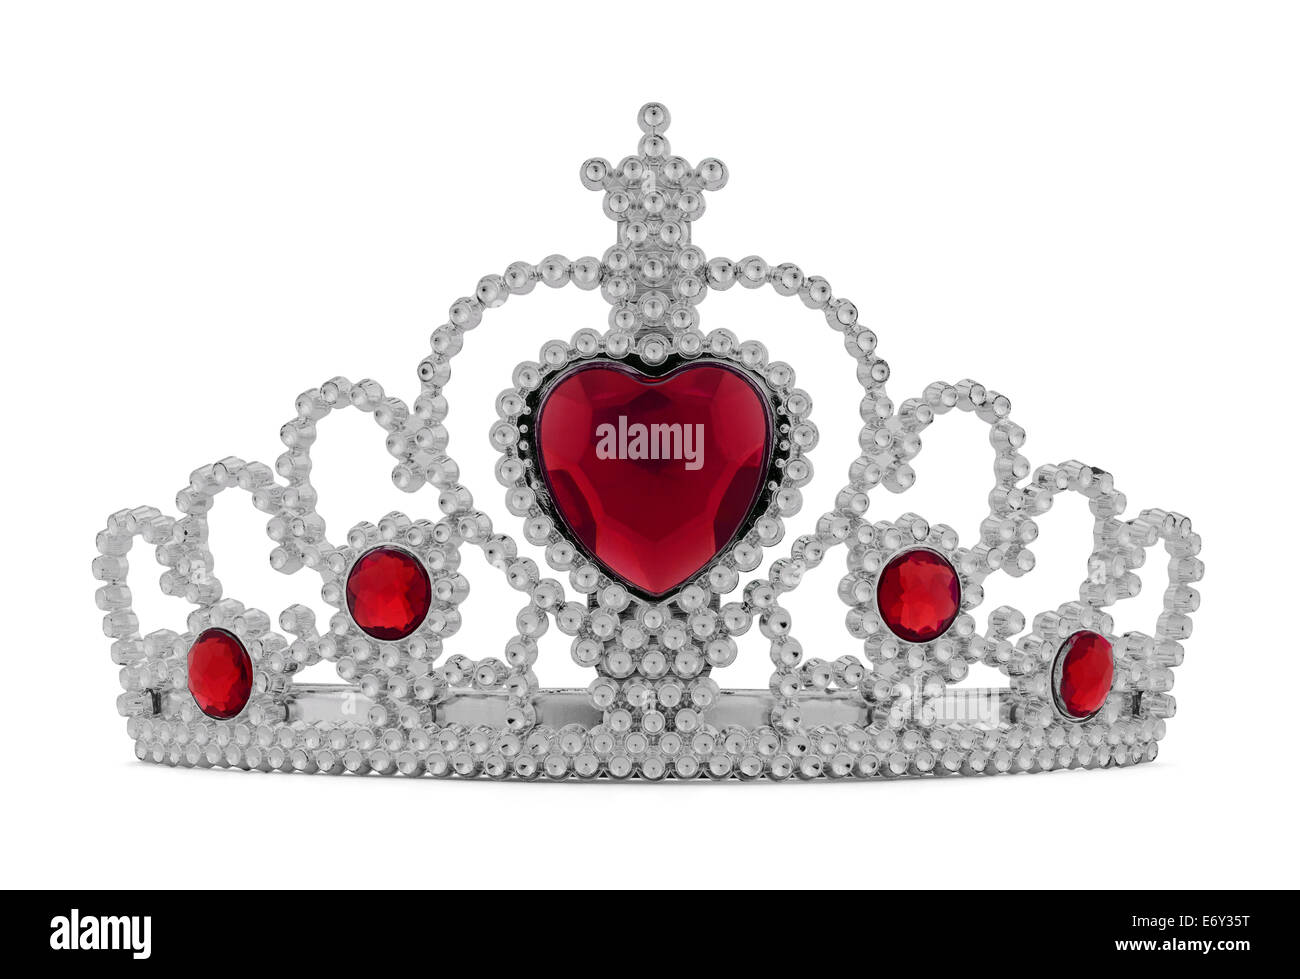 Girls Silver Tiara Crown with Red Heart Isolated on White Background. Stock Photo